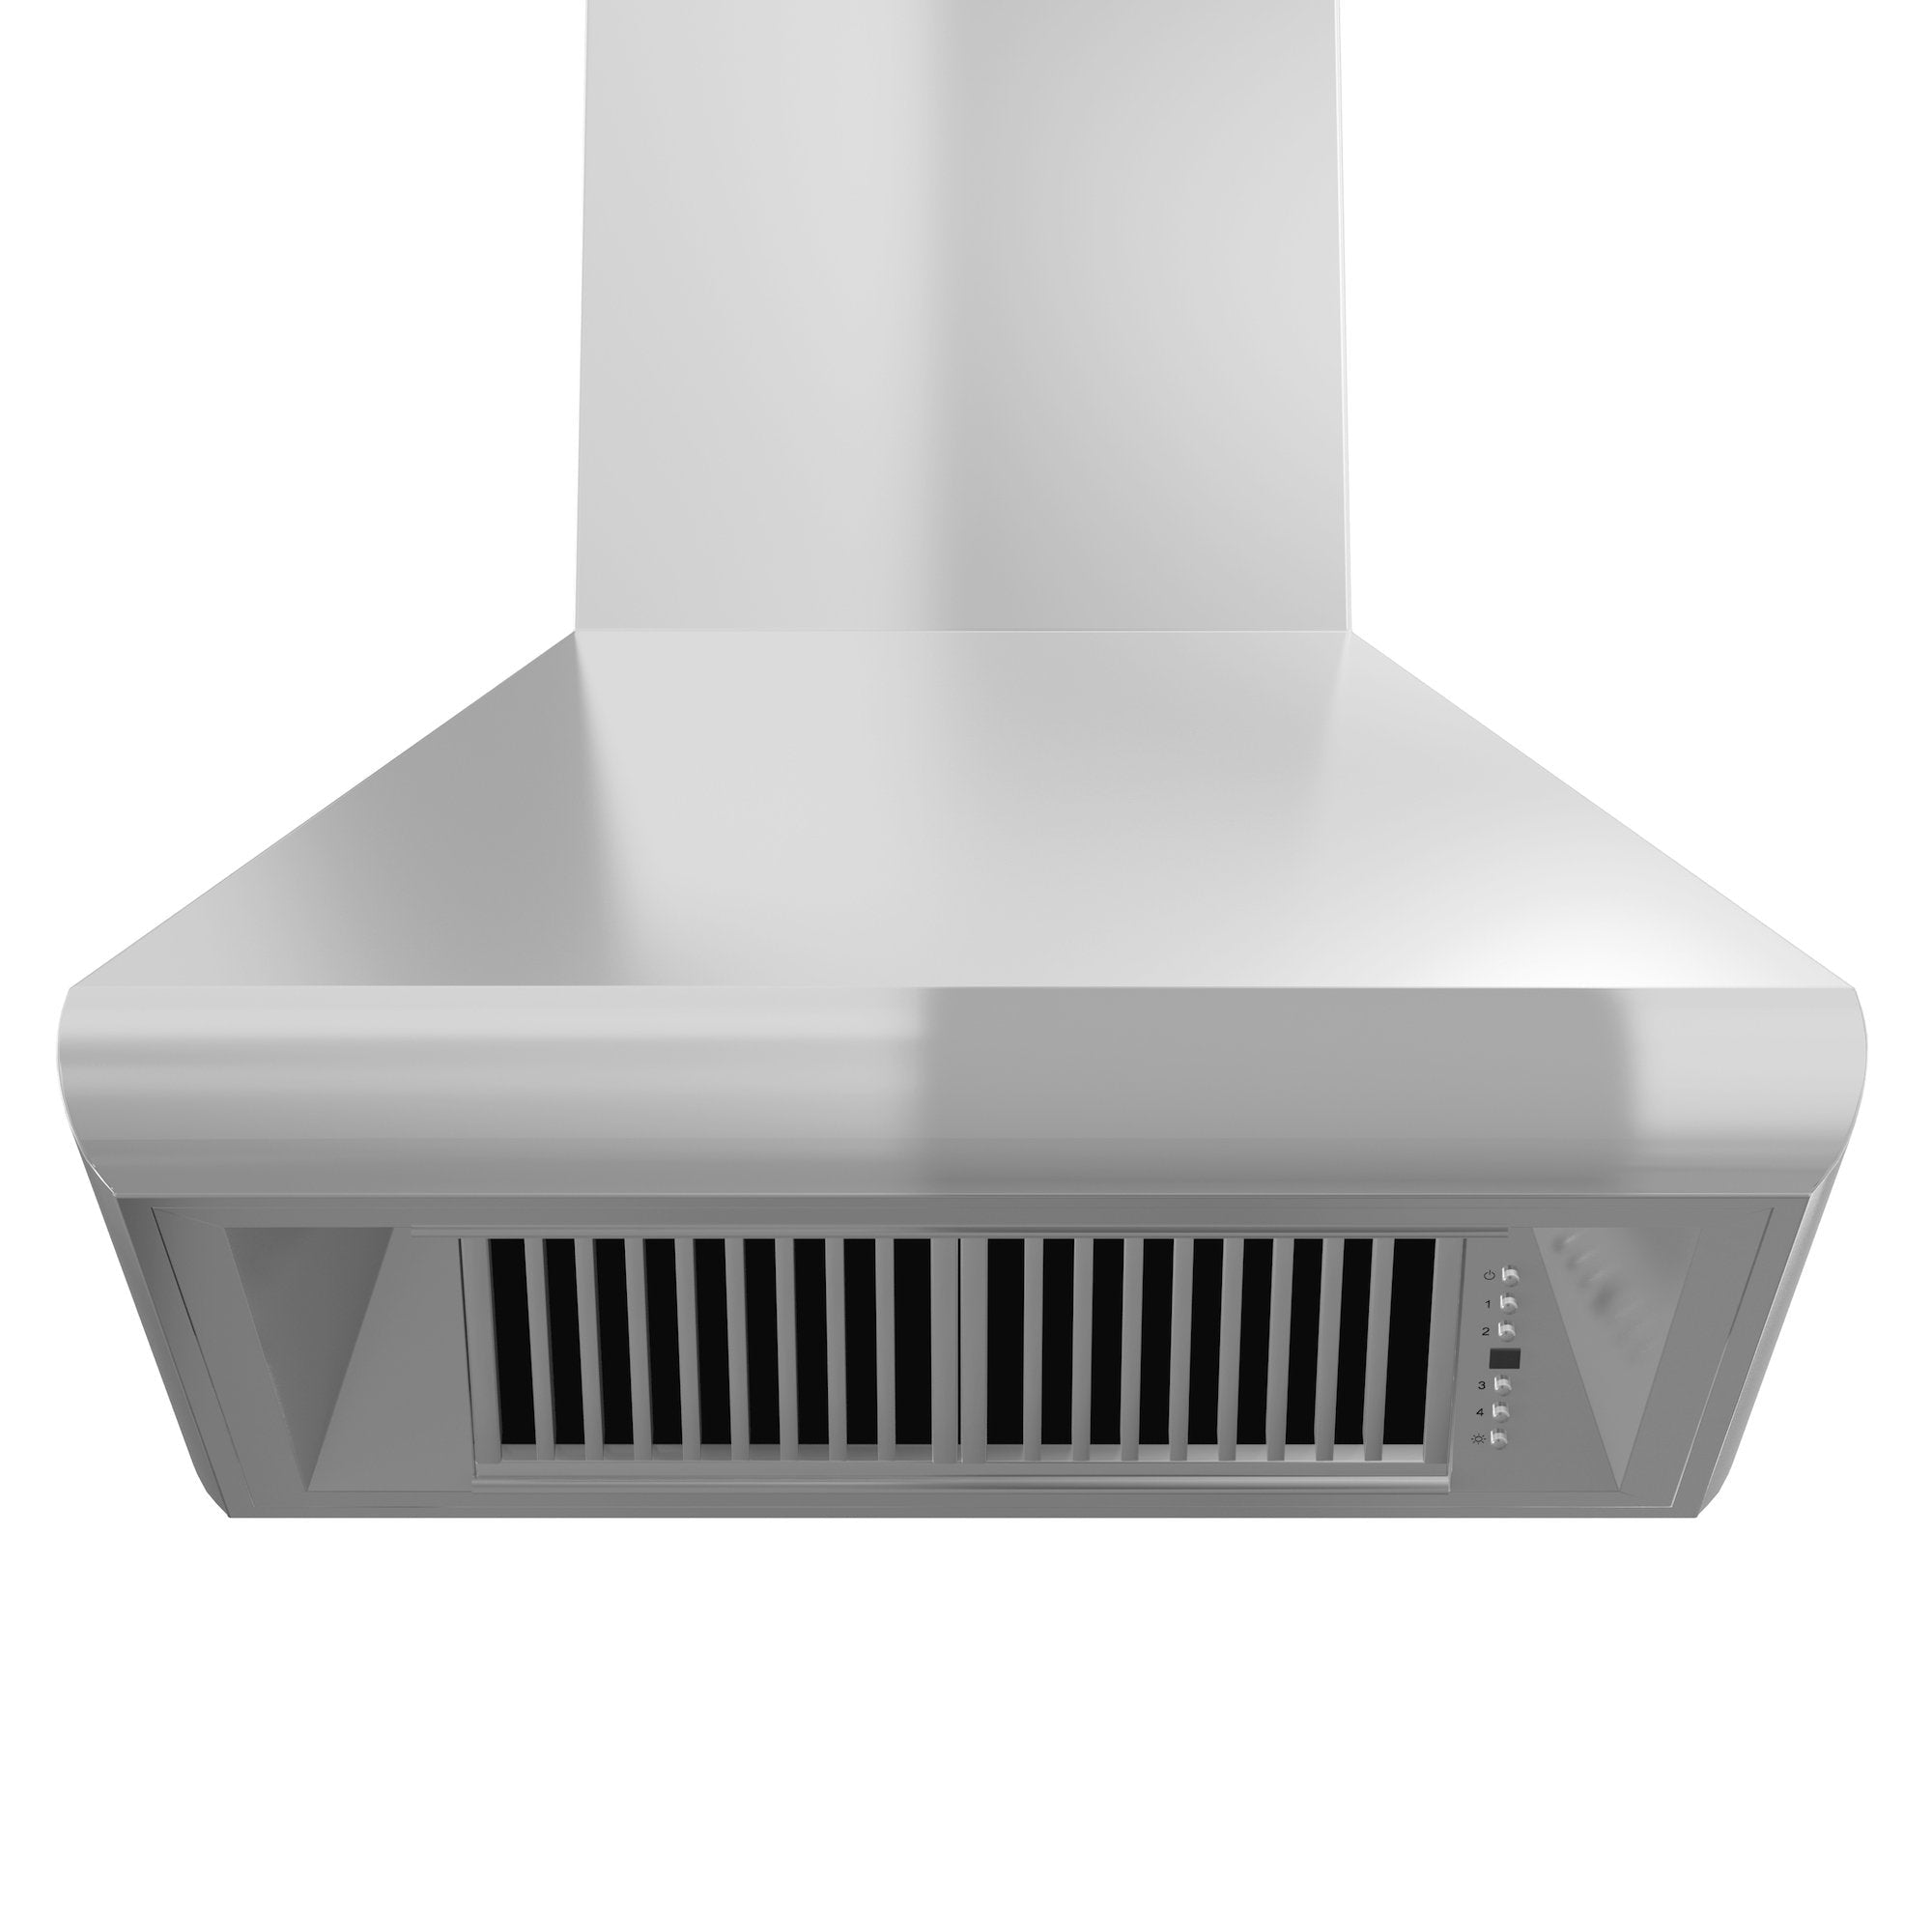 ZLINE Professional Convertible Vent Wall Mount Range Hood in Stainless Steel with Crown Molding (587CRN) front, under.